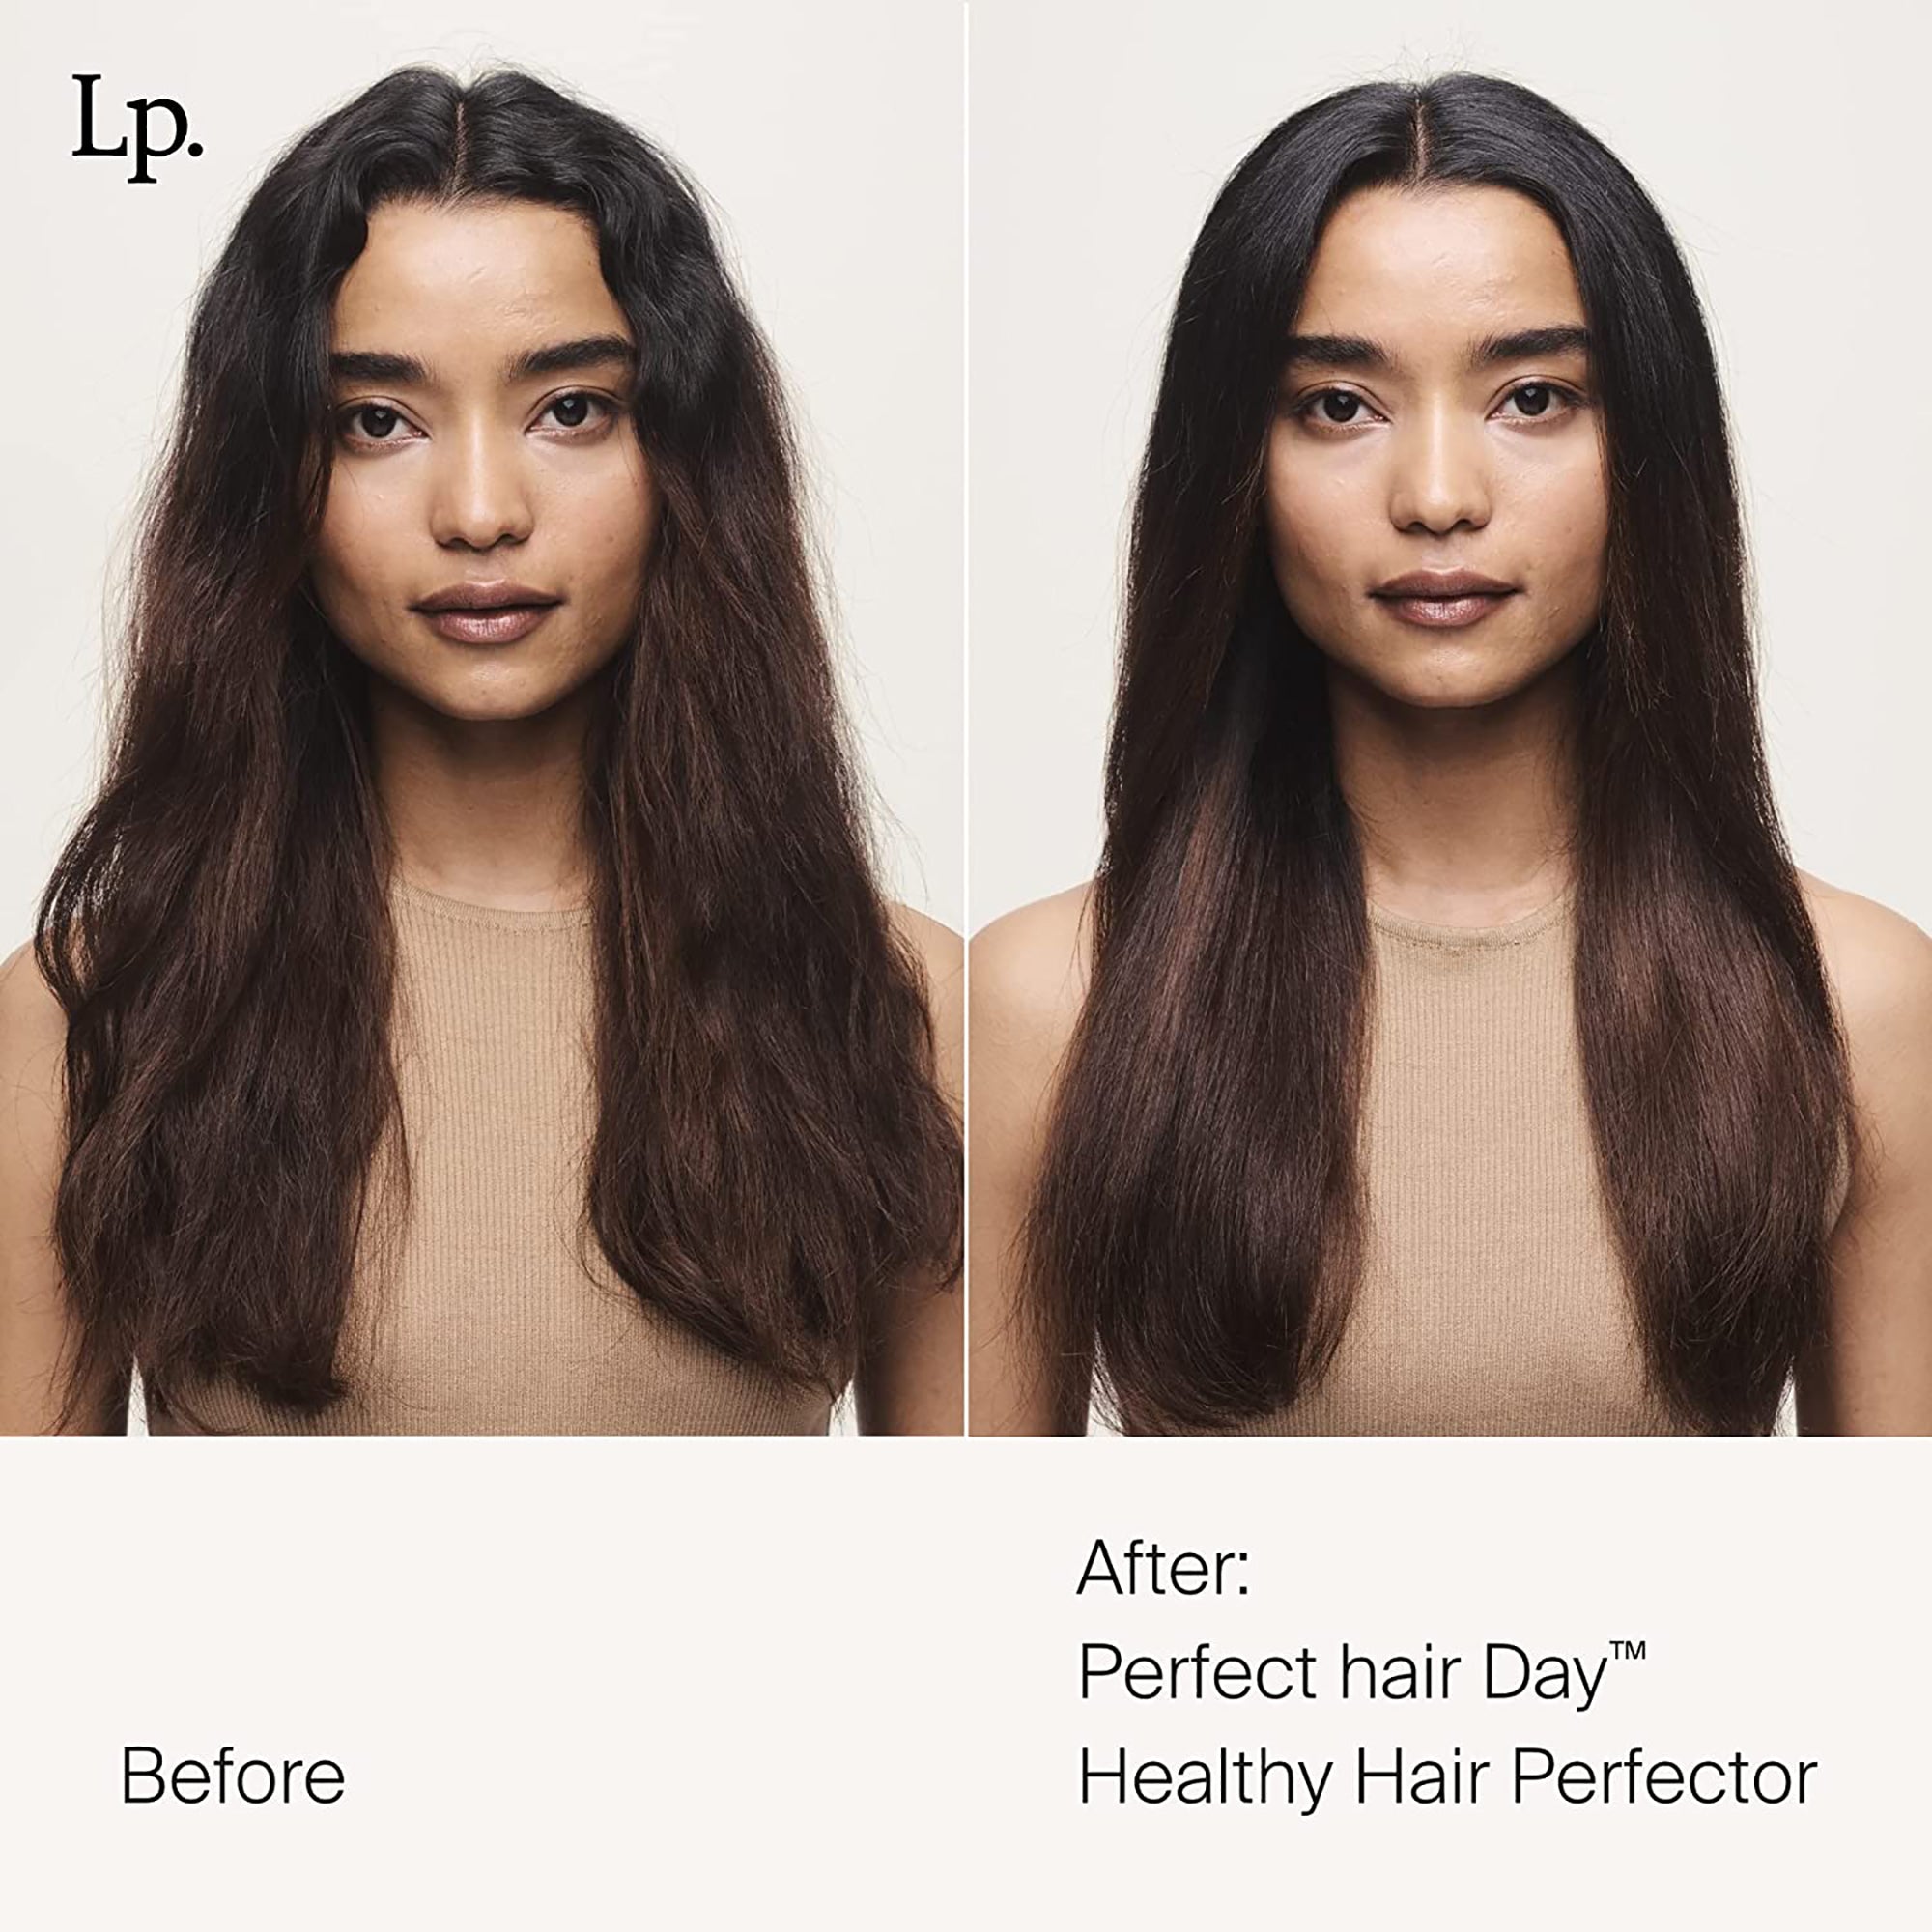 Living Proof Perfect Hair Day Healthy Hair Perfector / 4OZ